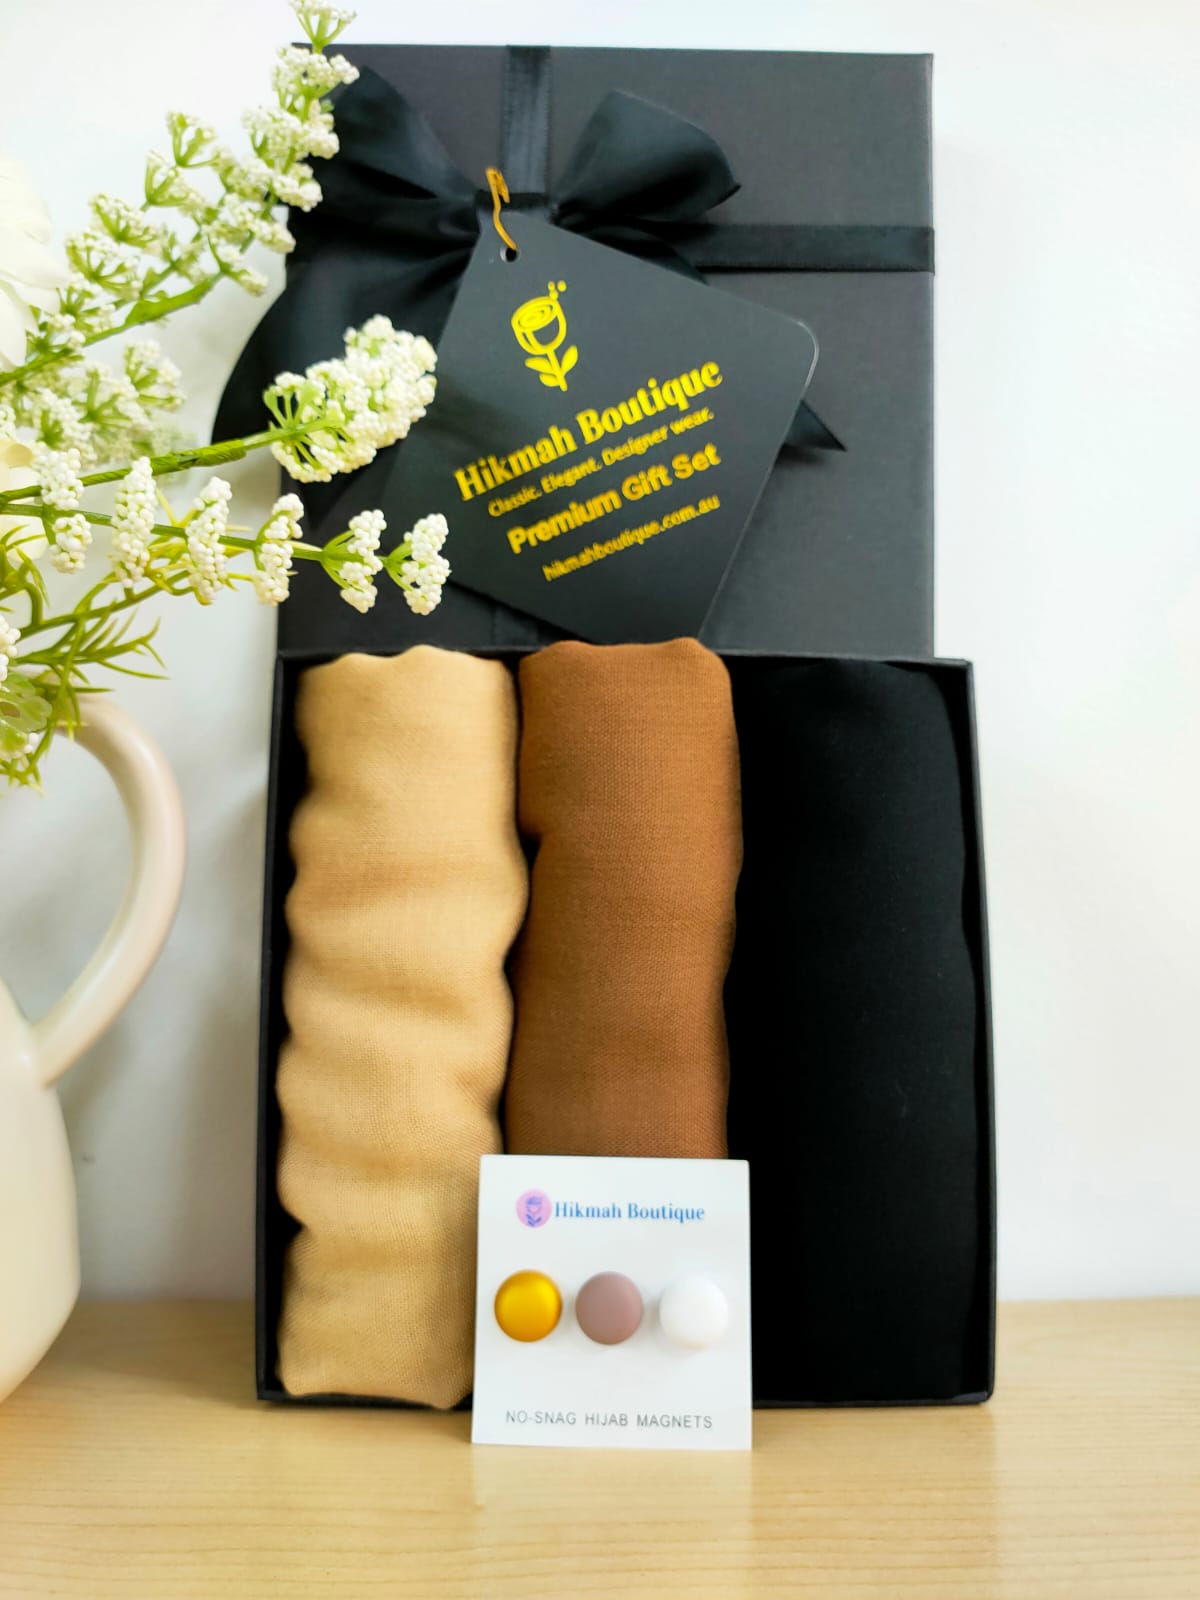 Elevate your gifting experience with our Viscose Hijab Gift Box from the Modest Sandstone Range. Handcrafted with care and offering free shipping, our exclusive Islamic gift sets are perfect for Ramadan and special occasions. Shop now at Hikmah Boutique to discover the perfect gift for her.